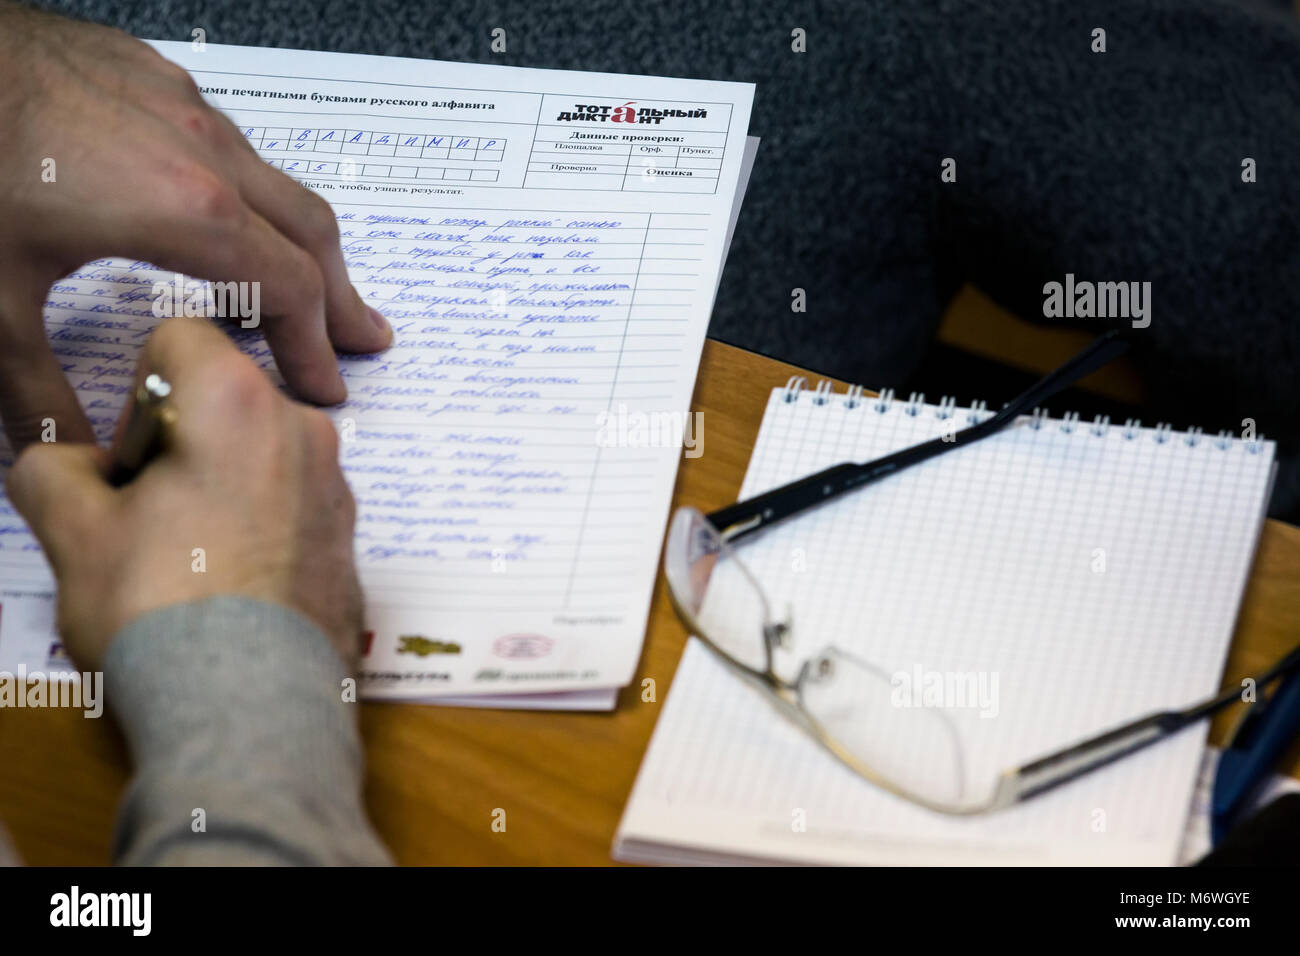 People write the text an annual international Russian language test, Totalny Diktant (Total Dictation) at Moscow Aviation Institute, Russia Stock Photo